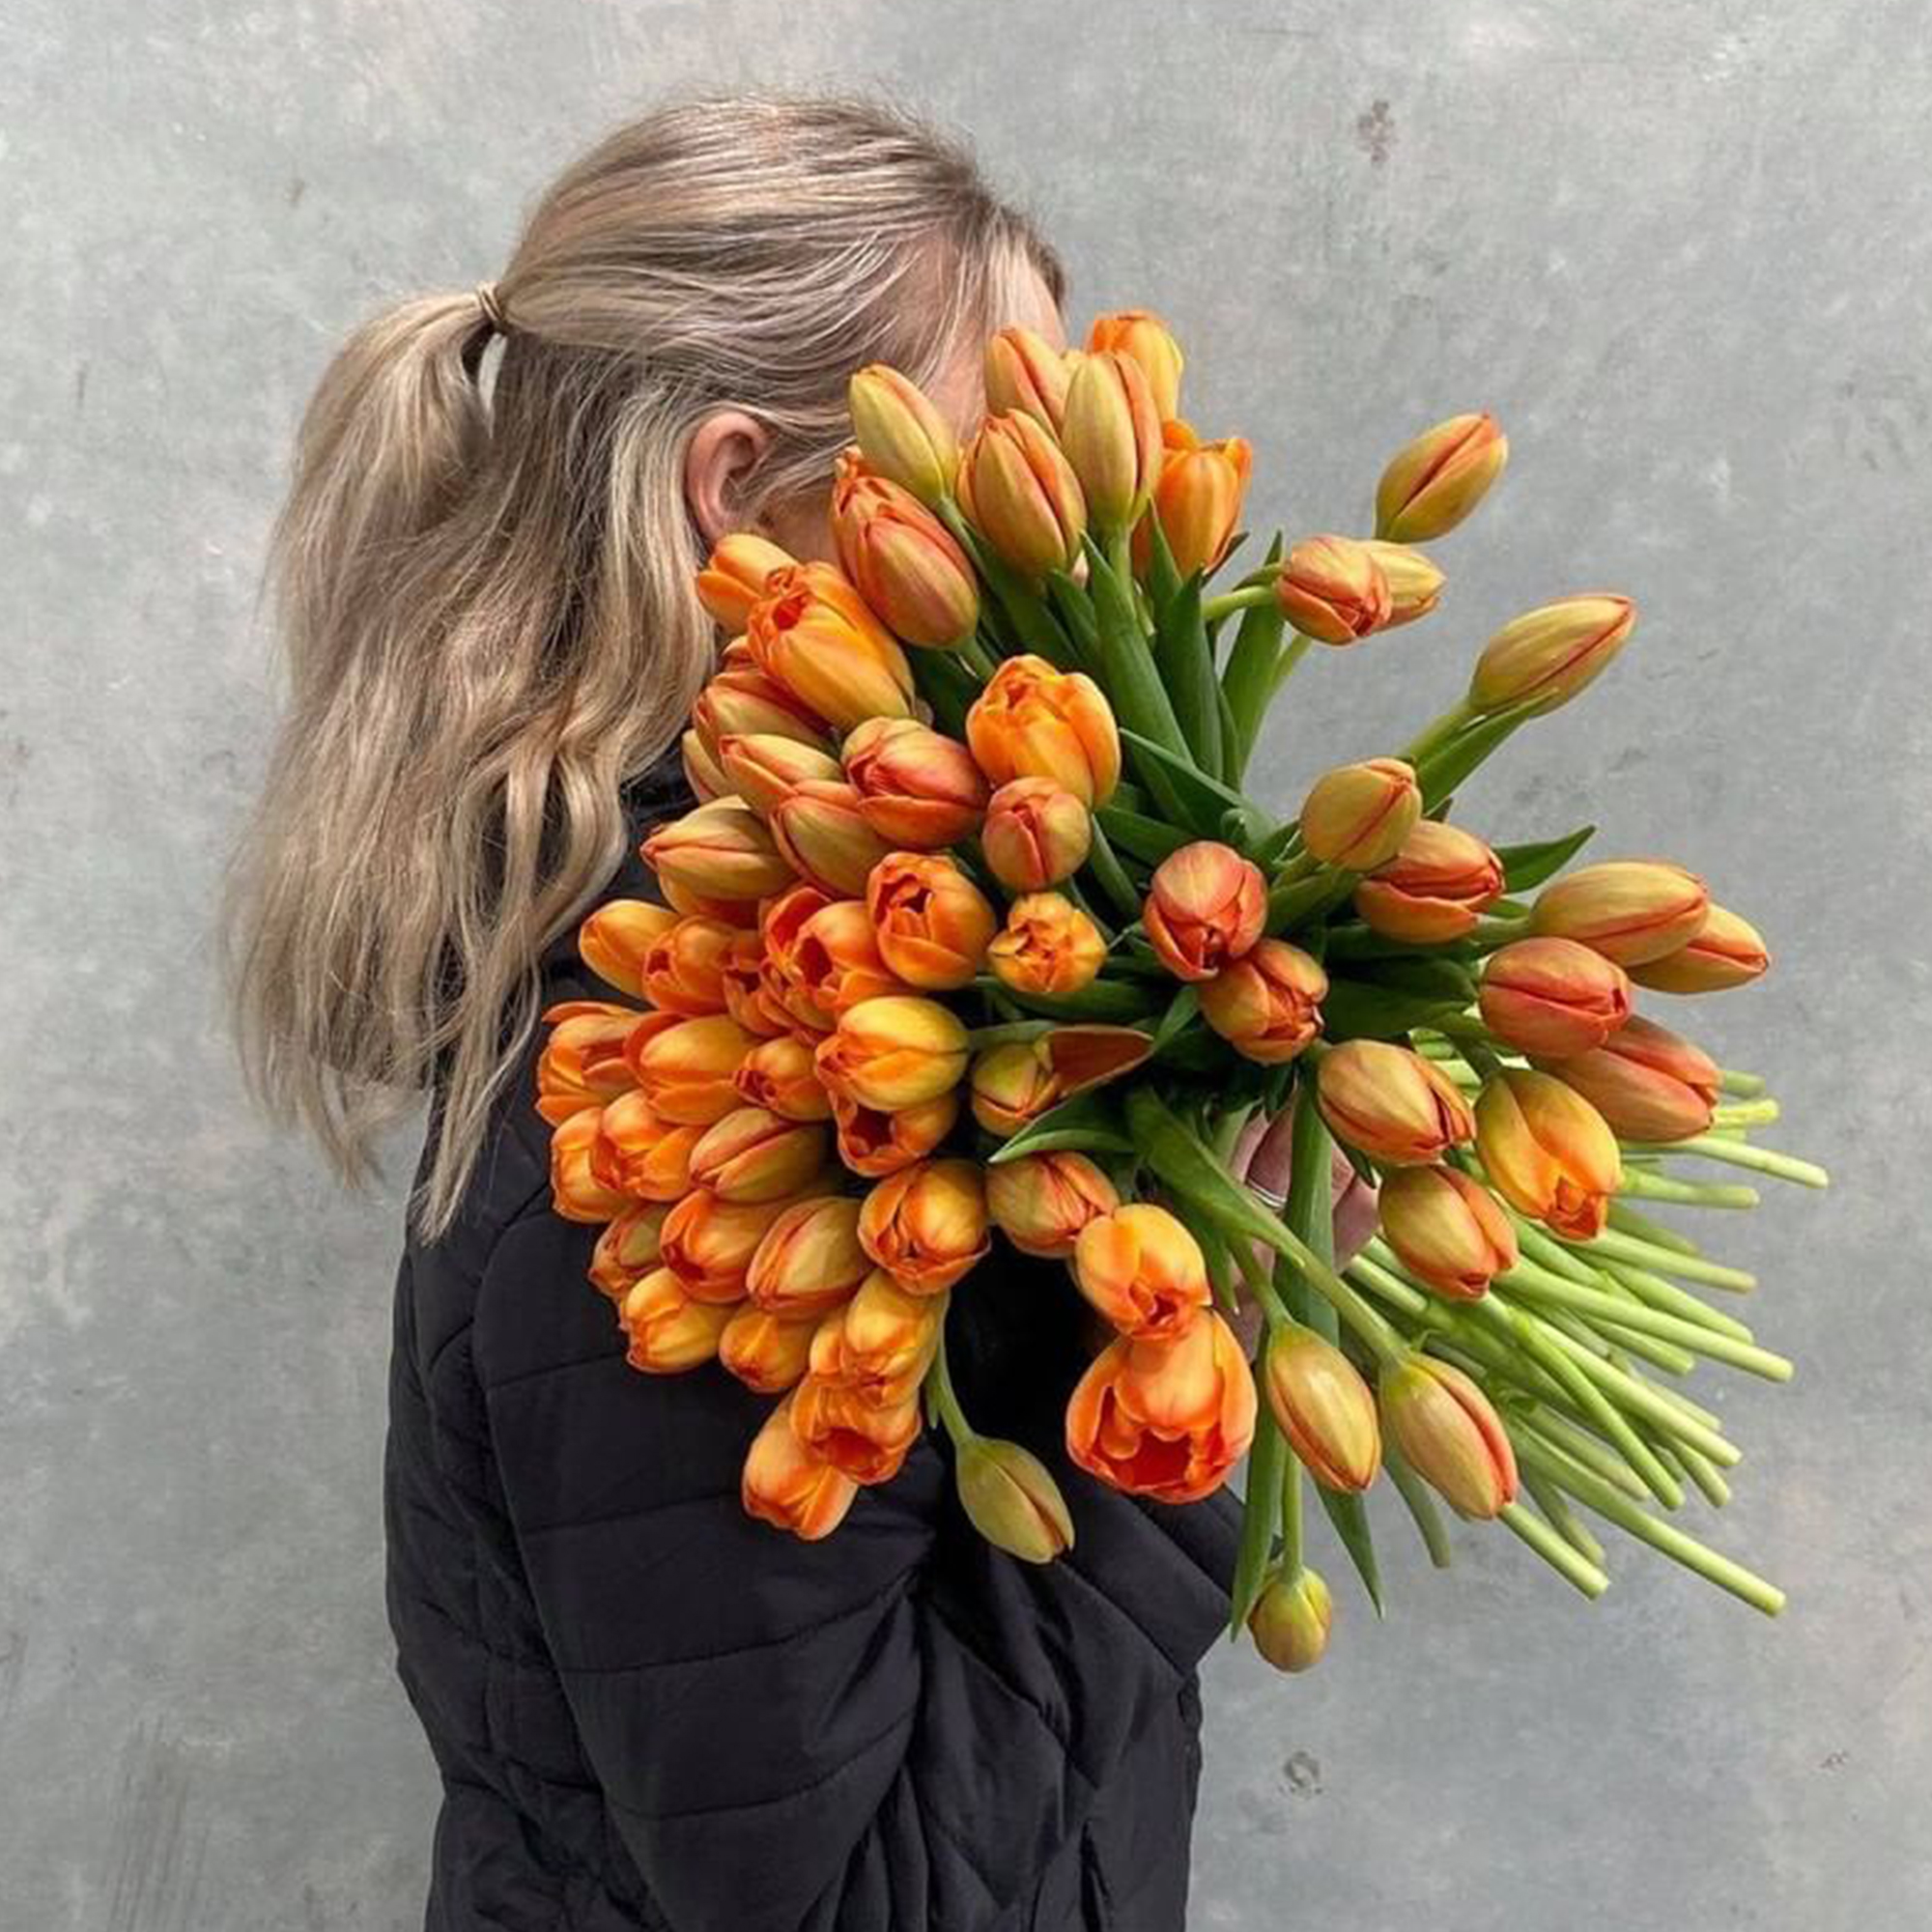 How to Care for and Style Your Fresh Cut Tulips to Perfection